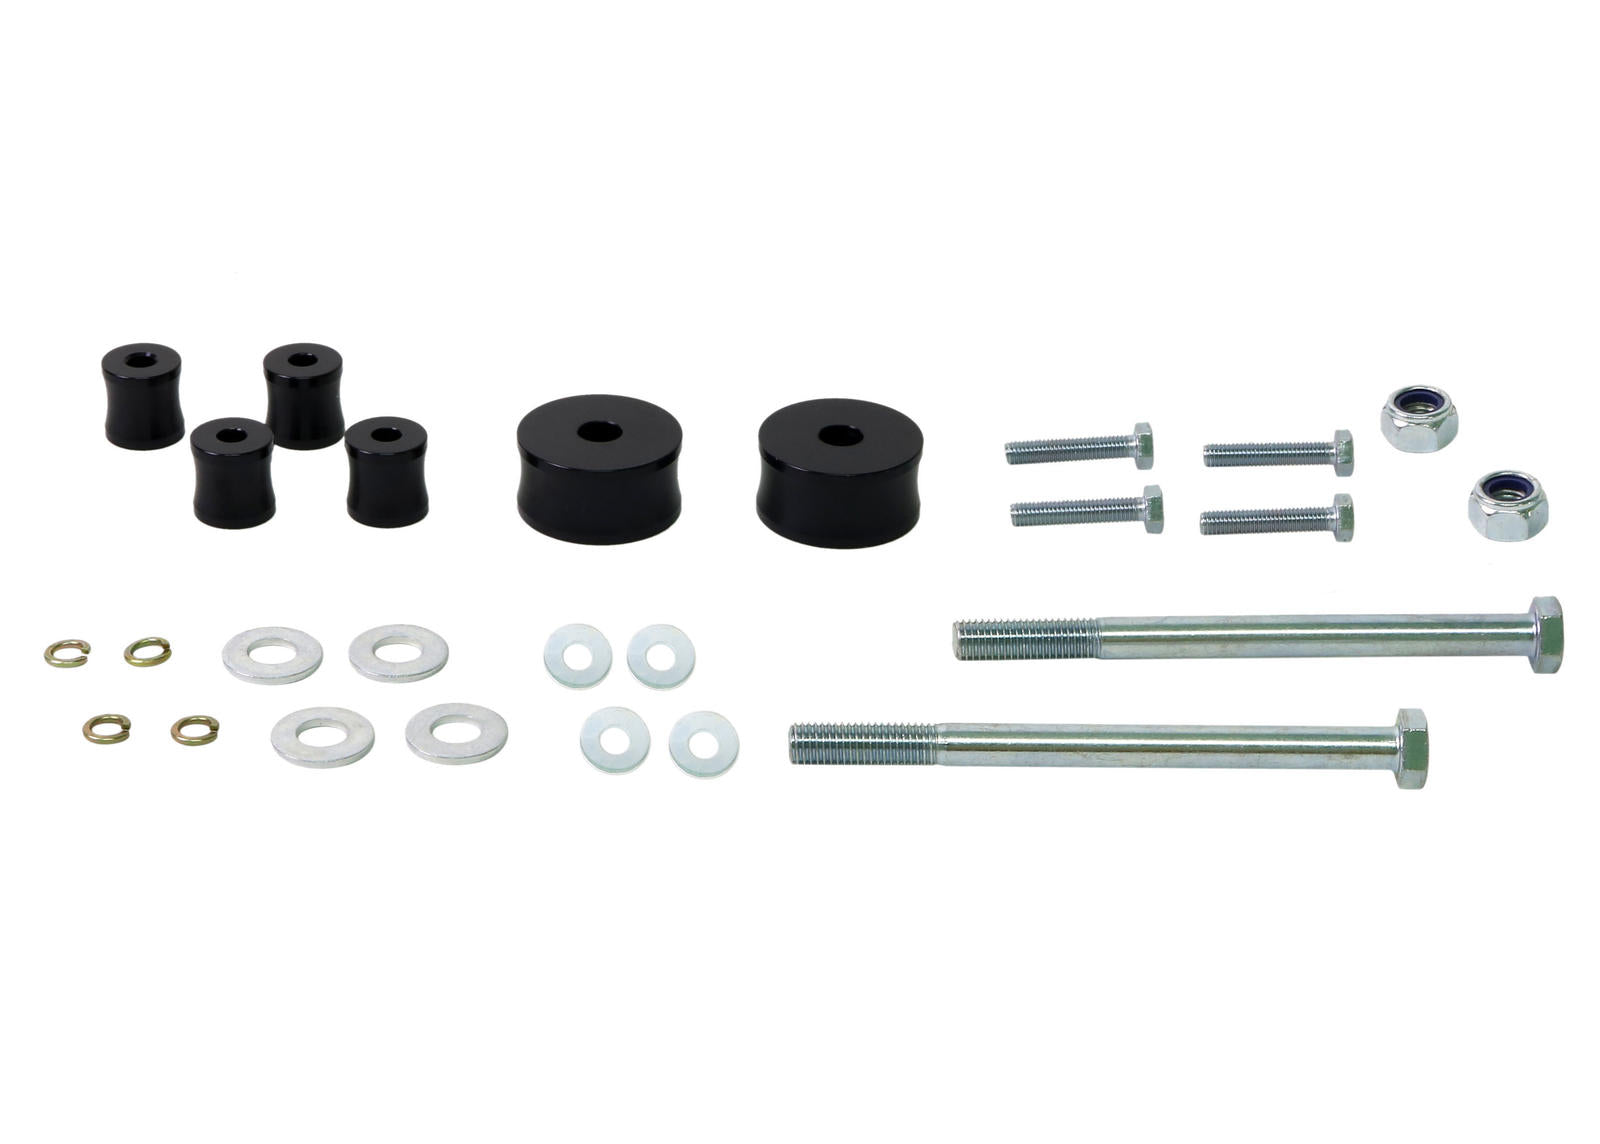 Front Differential Drop - Kit To Suit Toyota FJ Cruiser, HiLux And Prado